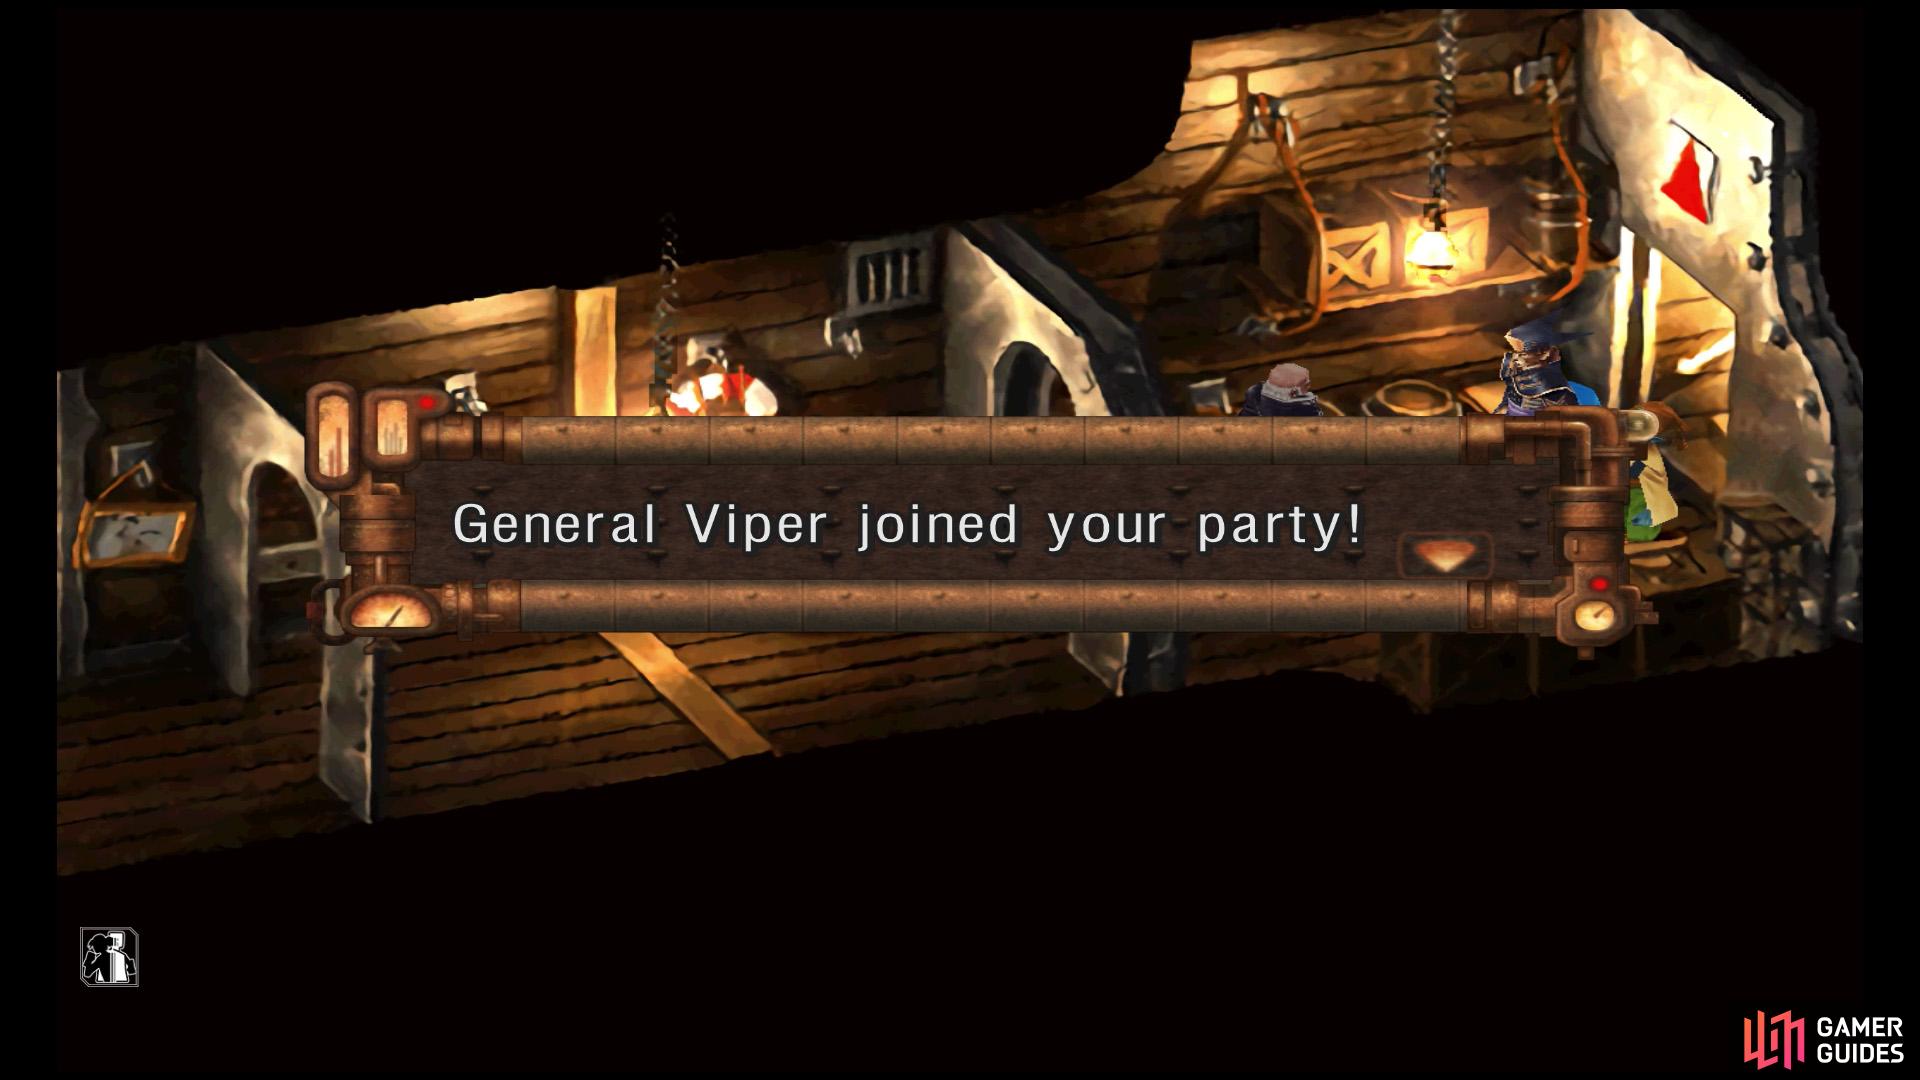 Hence General Viper decides to join your party.